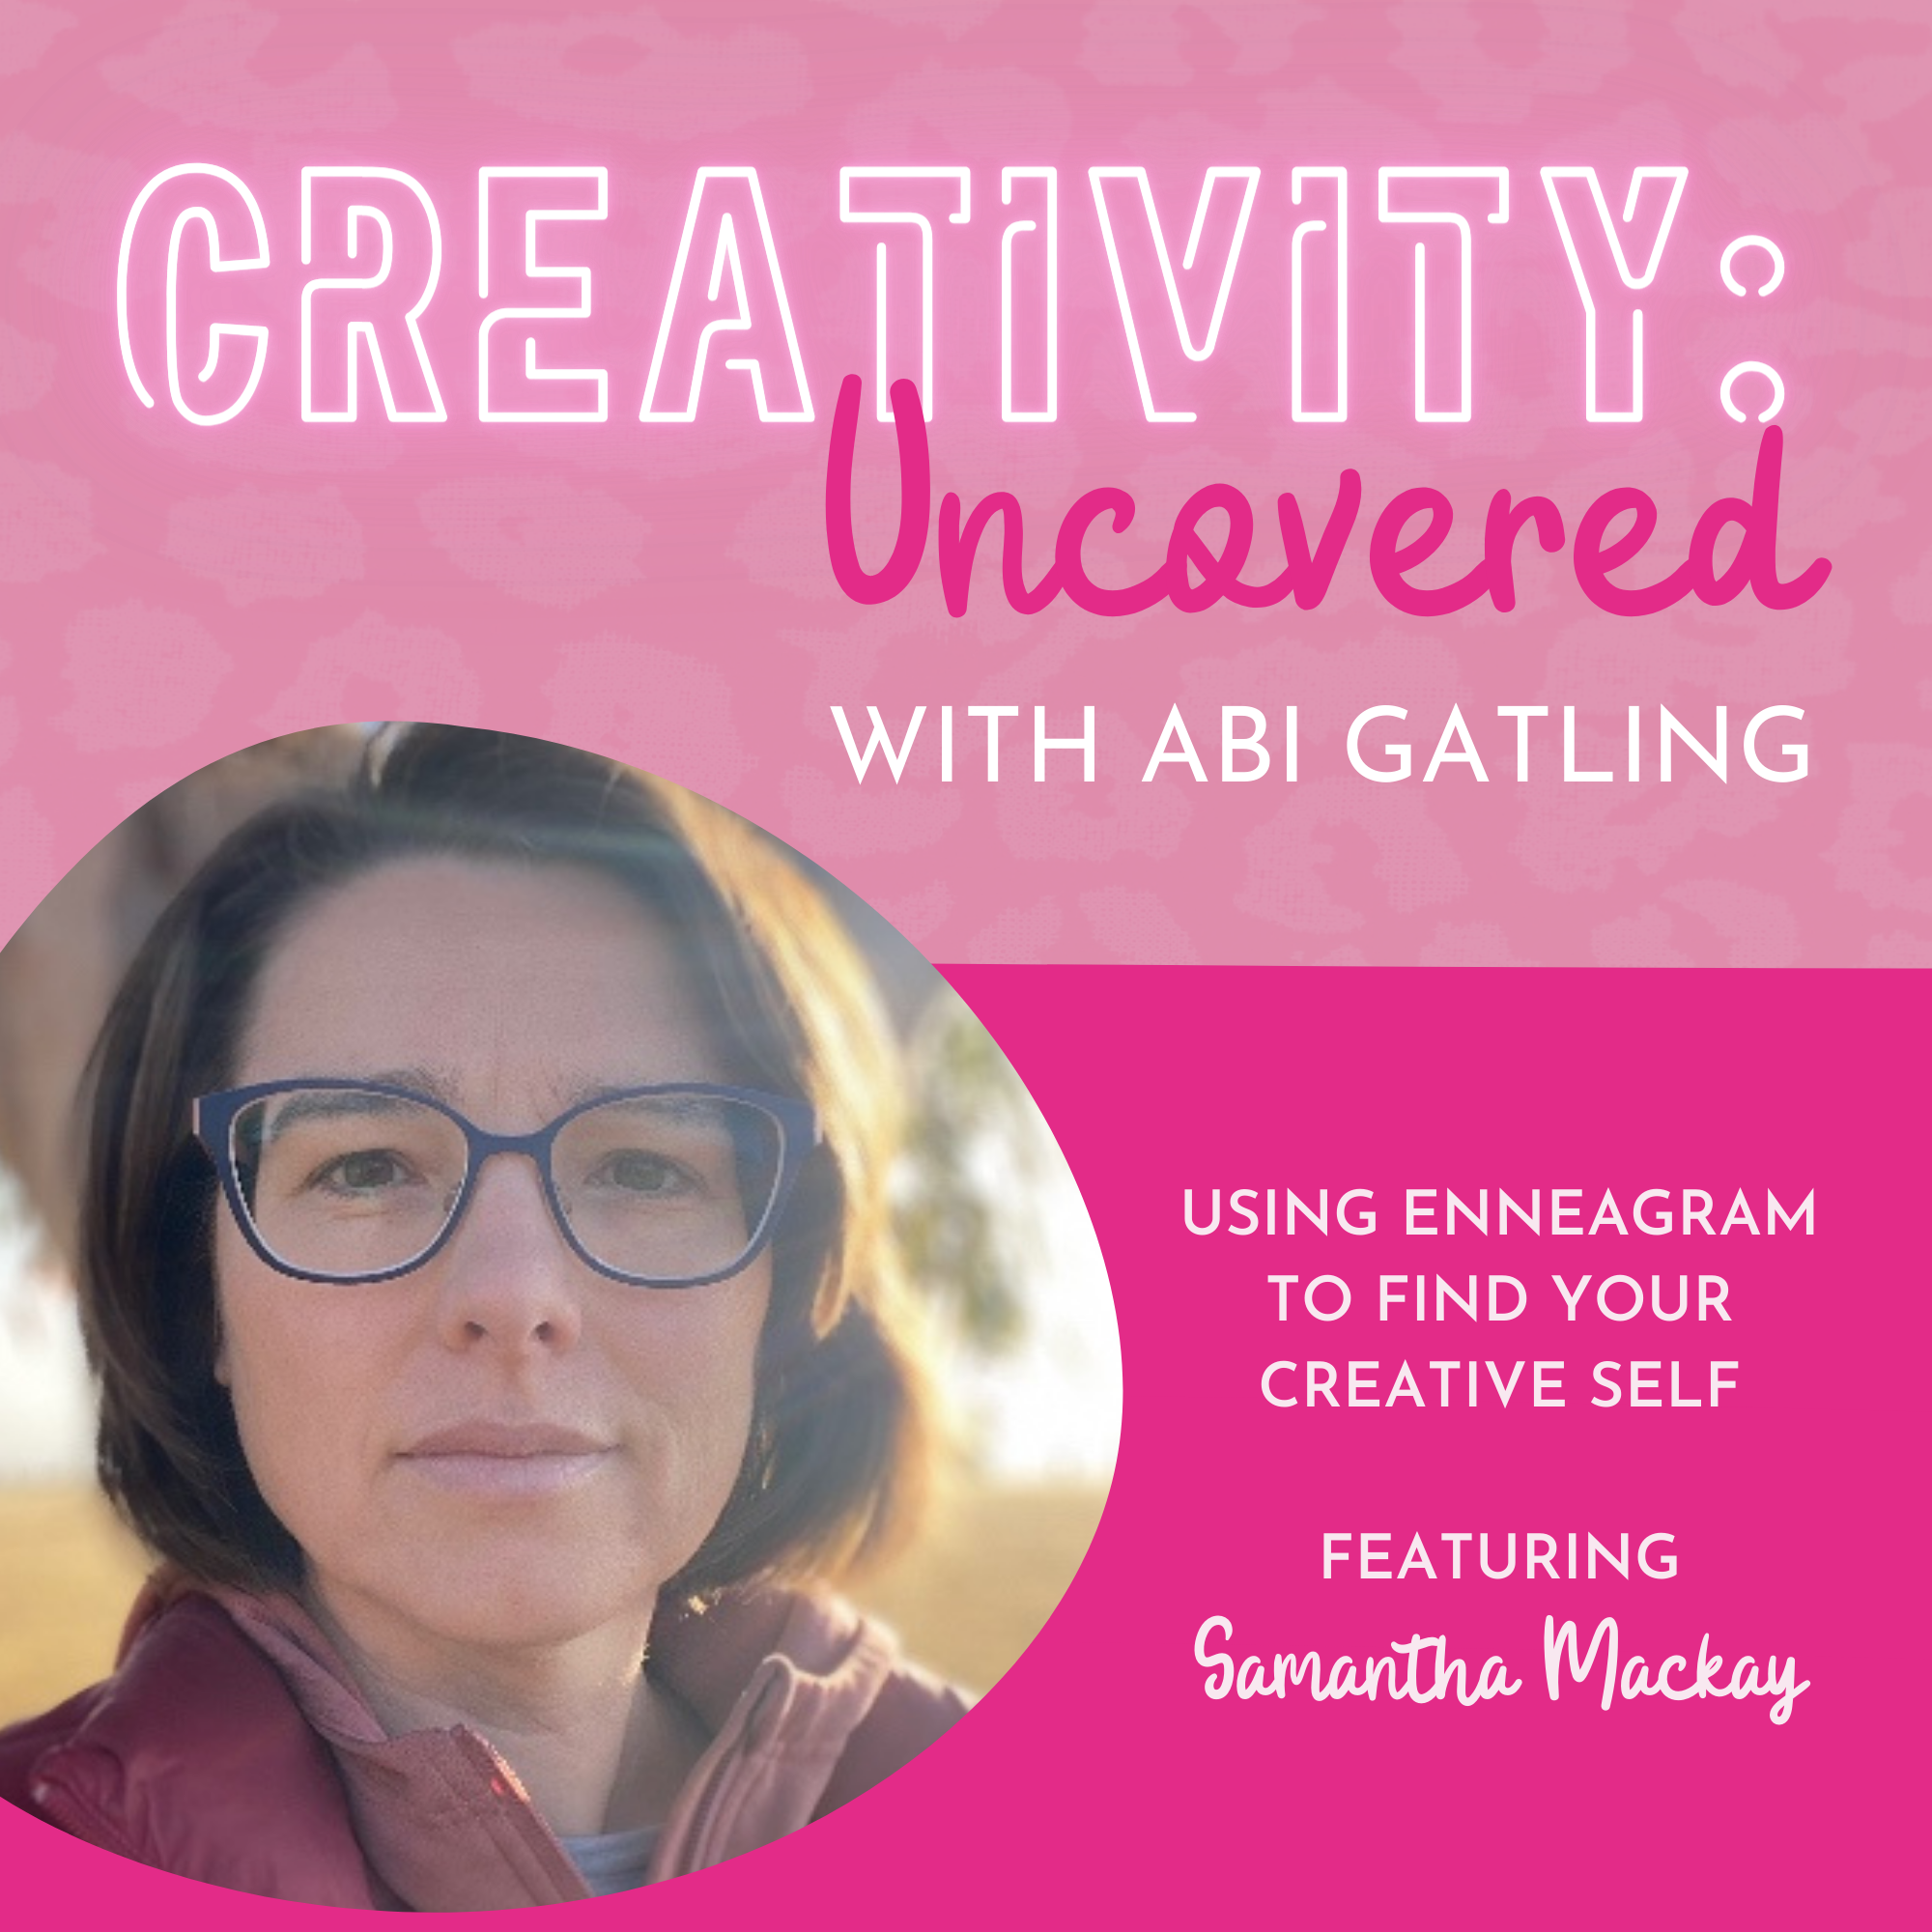 Creativity: Uncovered podcast episode graphic featuring guest Samantha Mackay